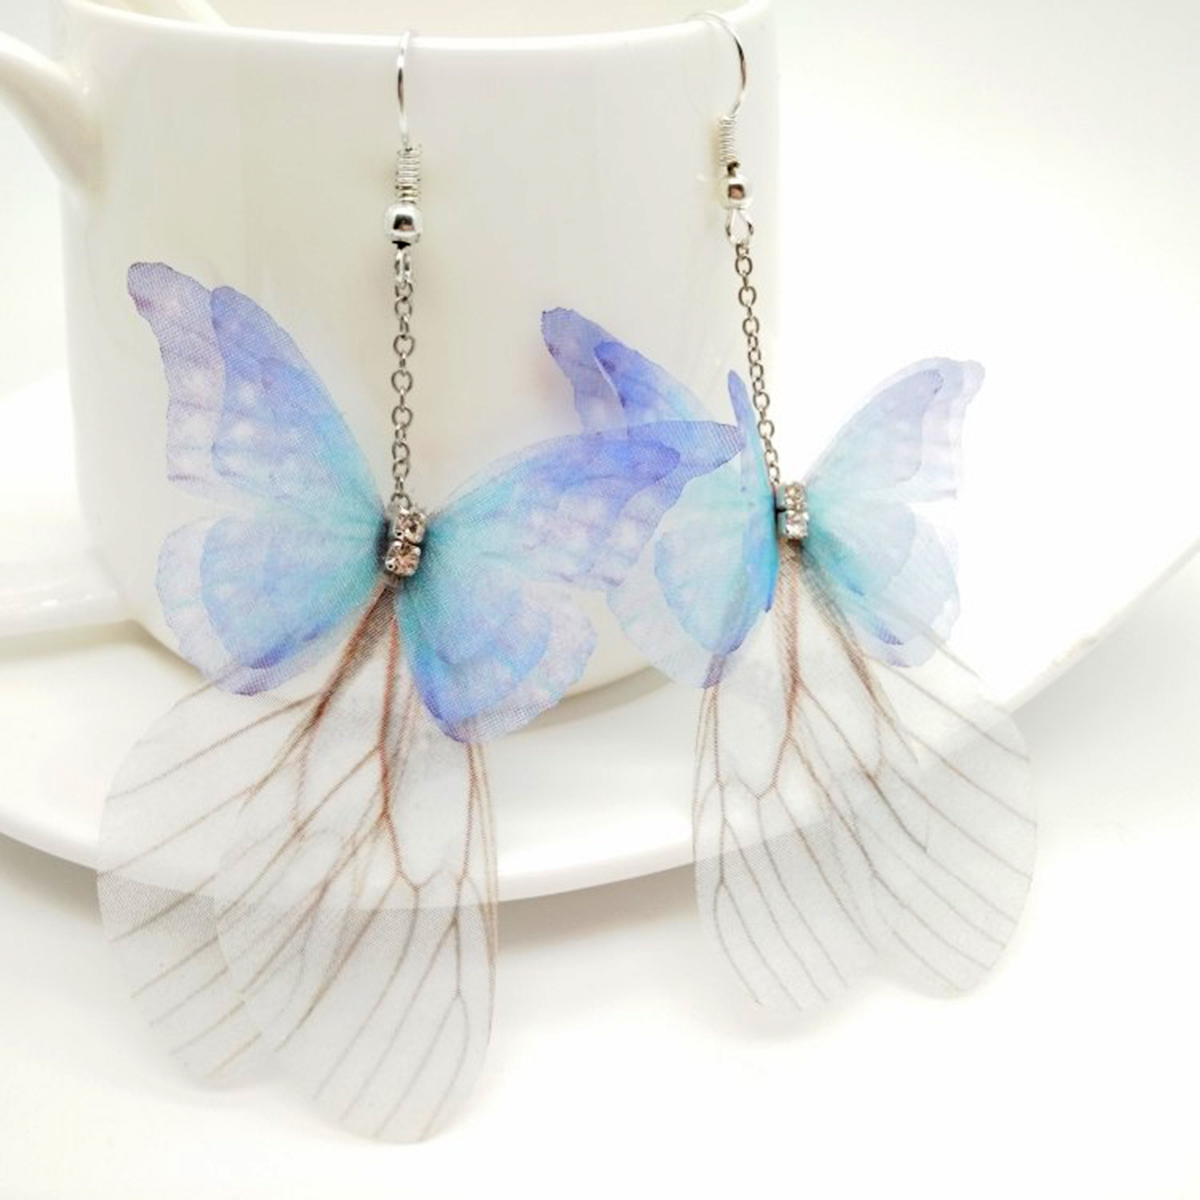 Picture of Ethereal Butterfly Earrings Silver Tone Light Blue Clear Rhinestone 79mm(3 1/8"), Post/ Wire Size: (20 gauge), 1 Pair